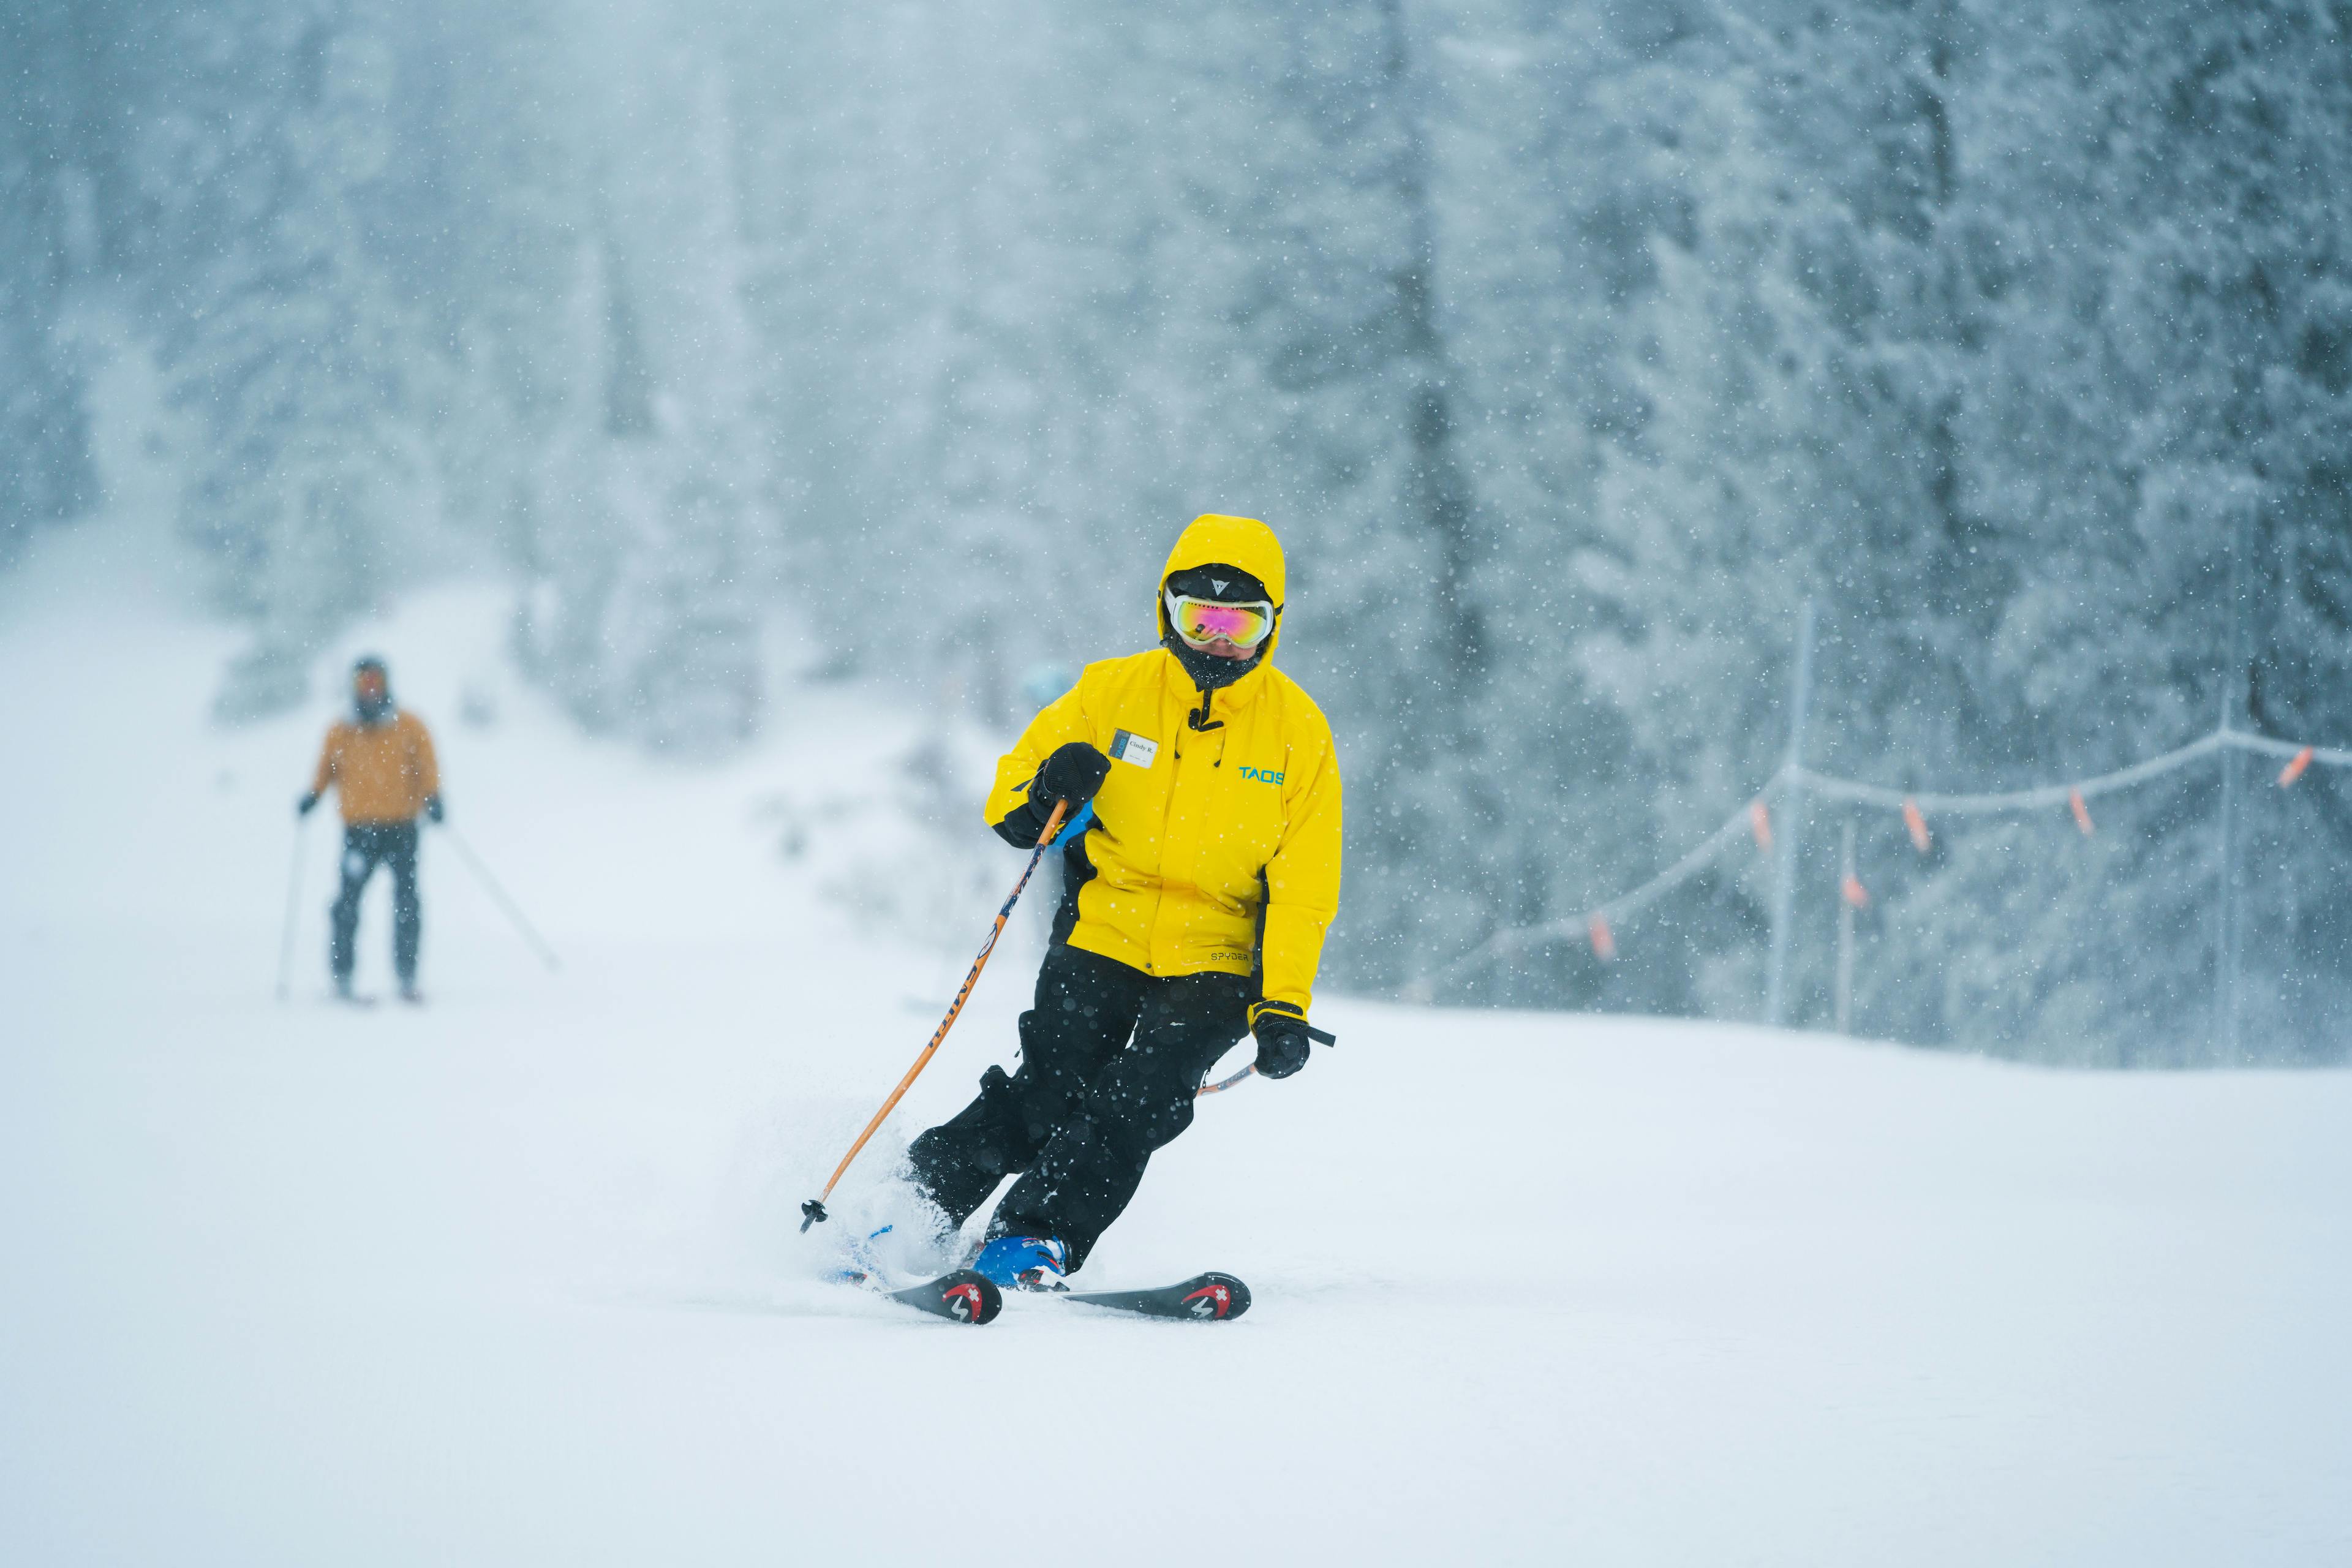 Snowsports instructor leads the way down on a snowy day at Taos Ski Valley